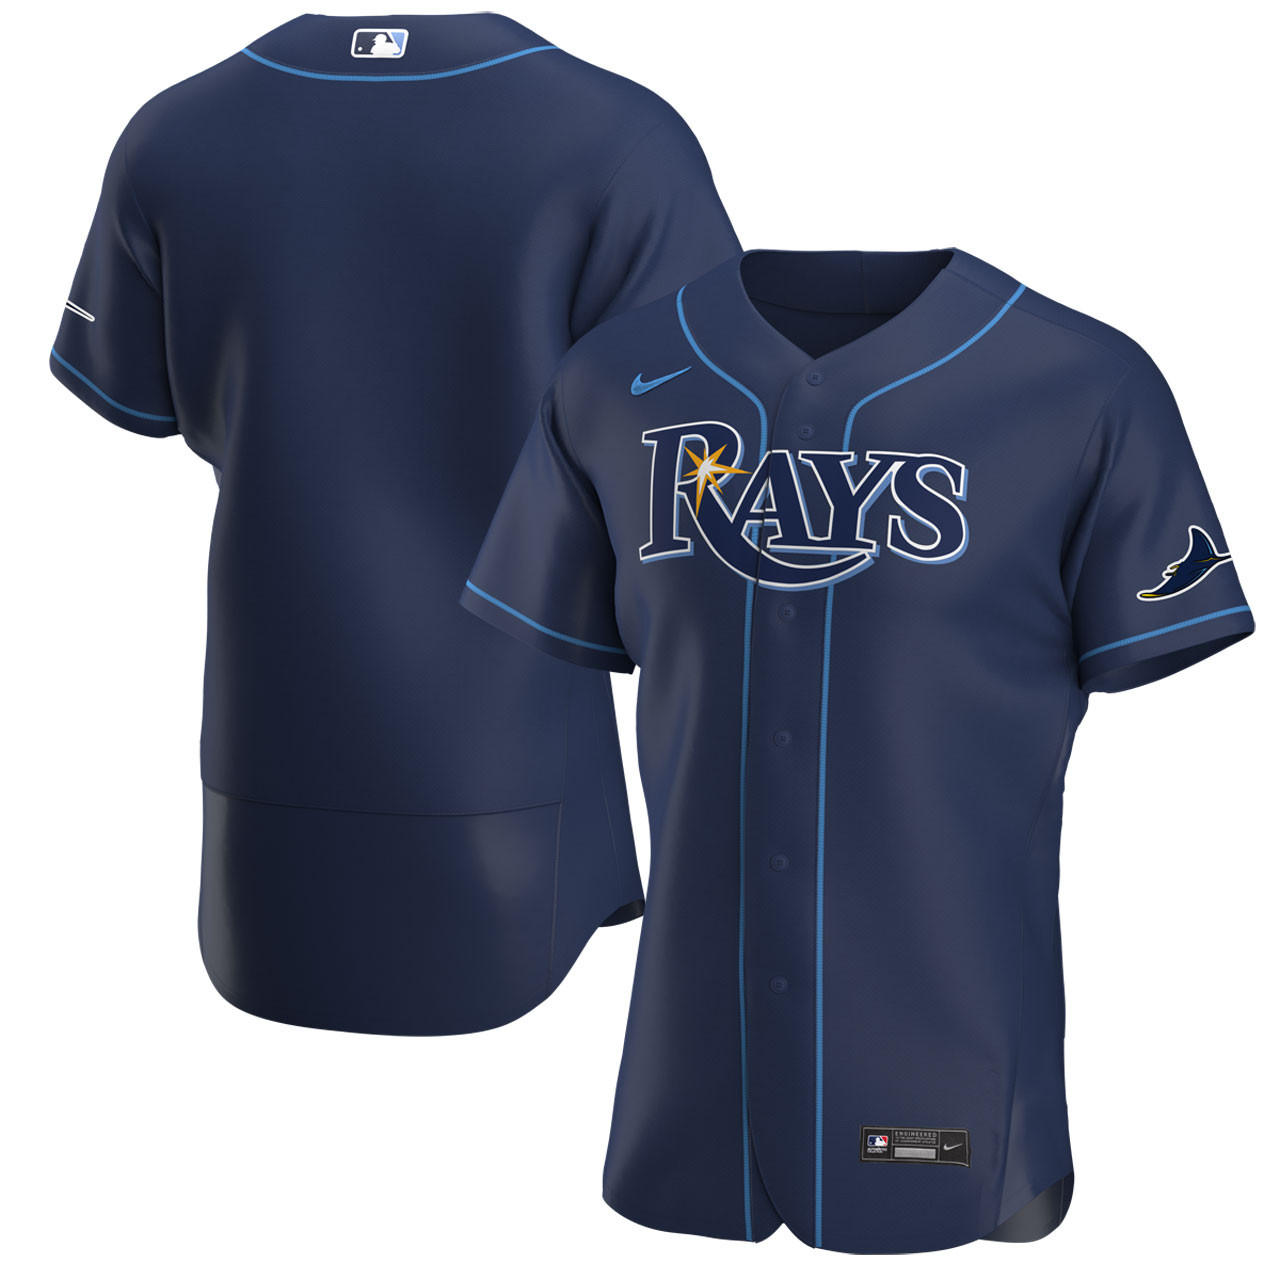 Tampa Bay Rays Navy Alternate Authentic Jersey by Nike